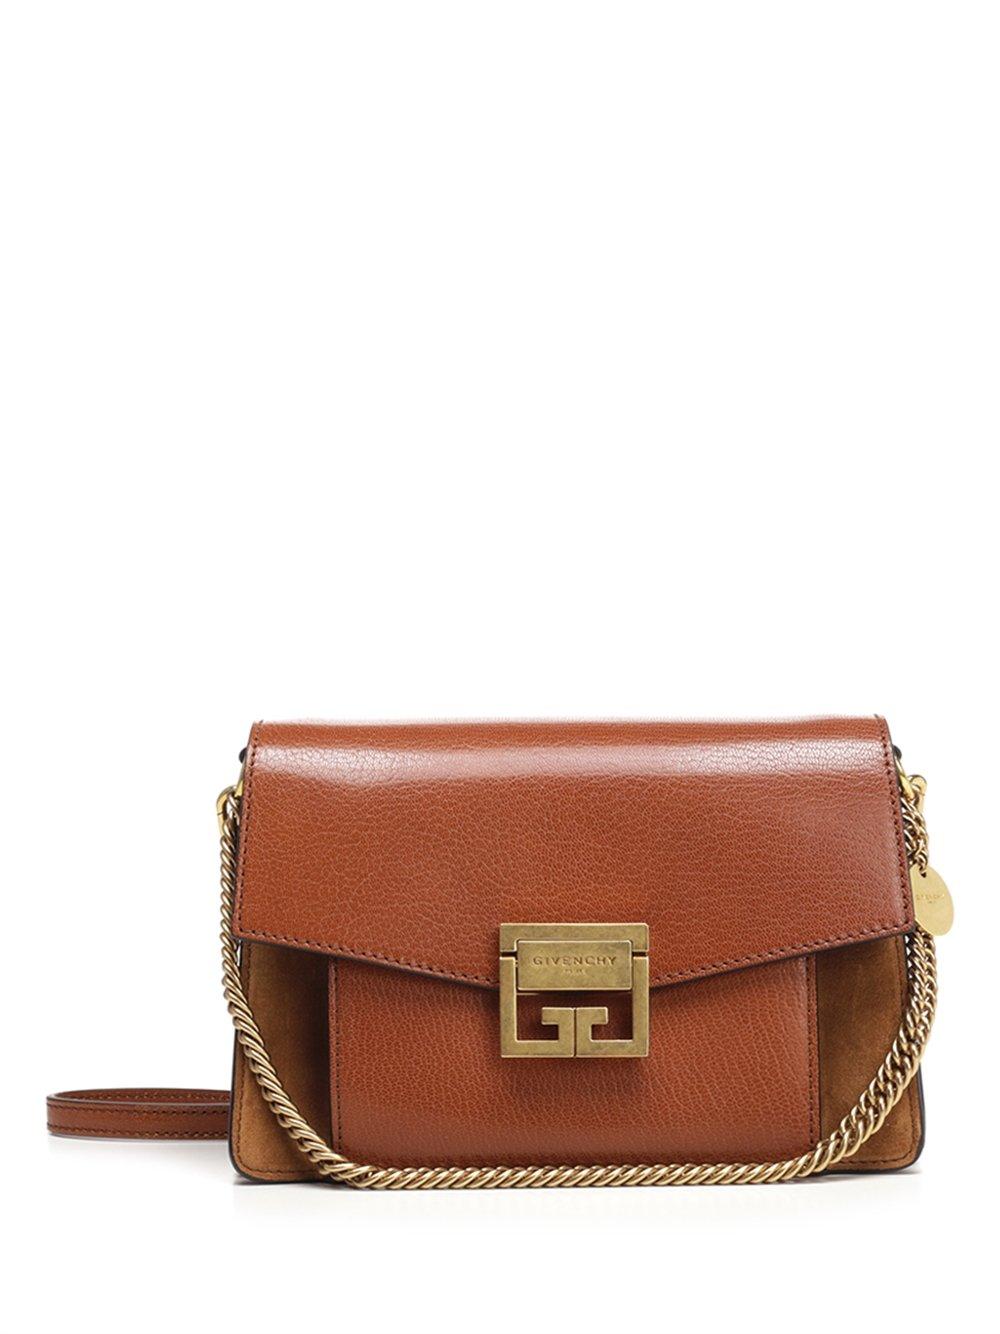 Givenchy Gv3 Small Leather & Suede Shoulder Bag in Brown | Lyst